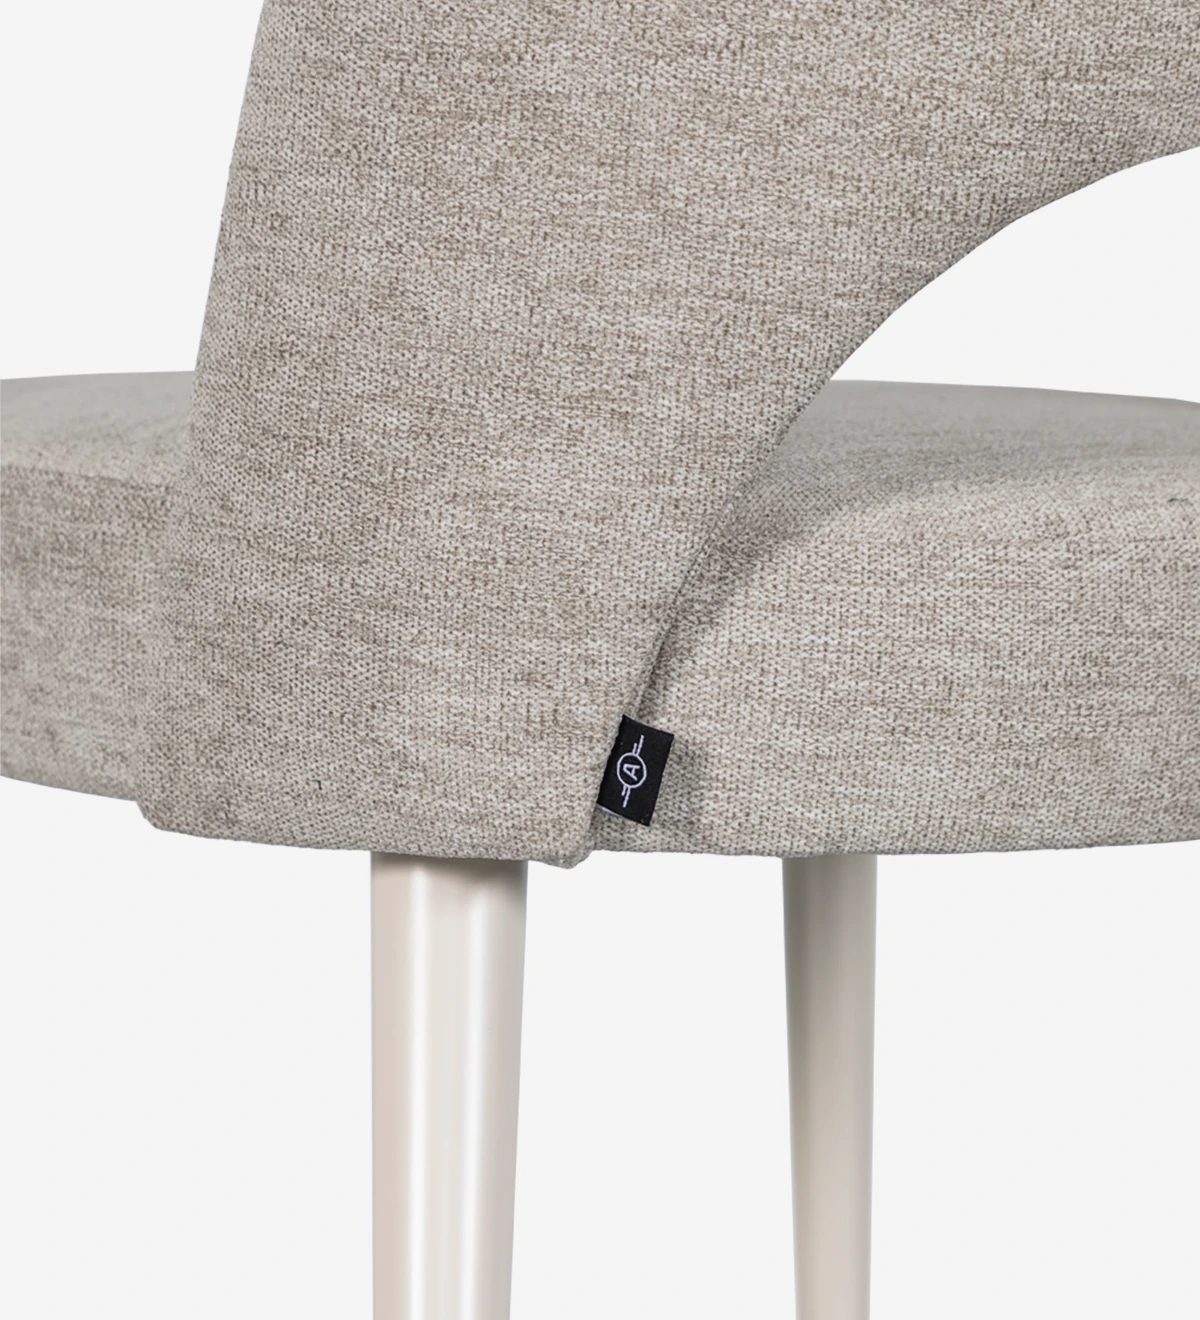 Chair upholstered in fabric, pearl lacquered feet.